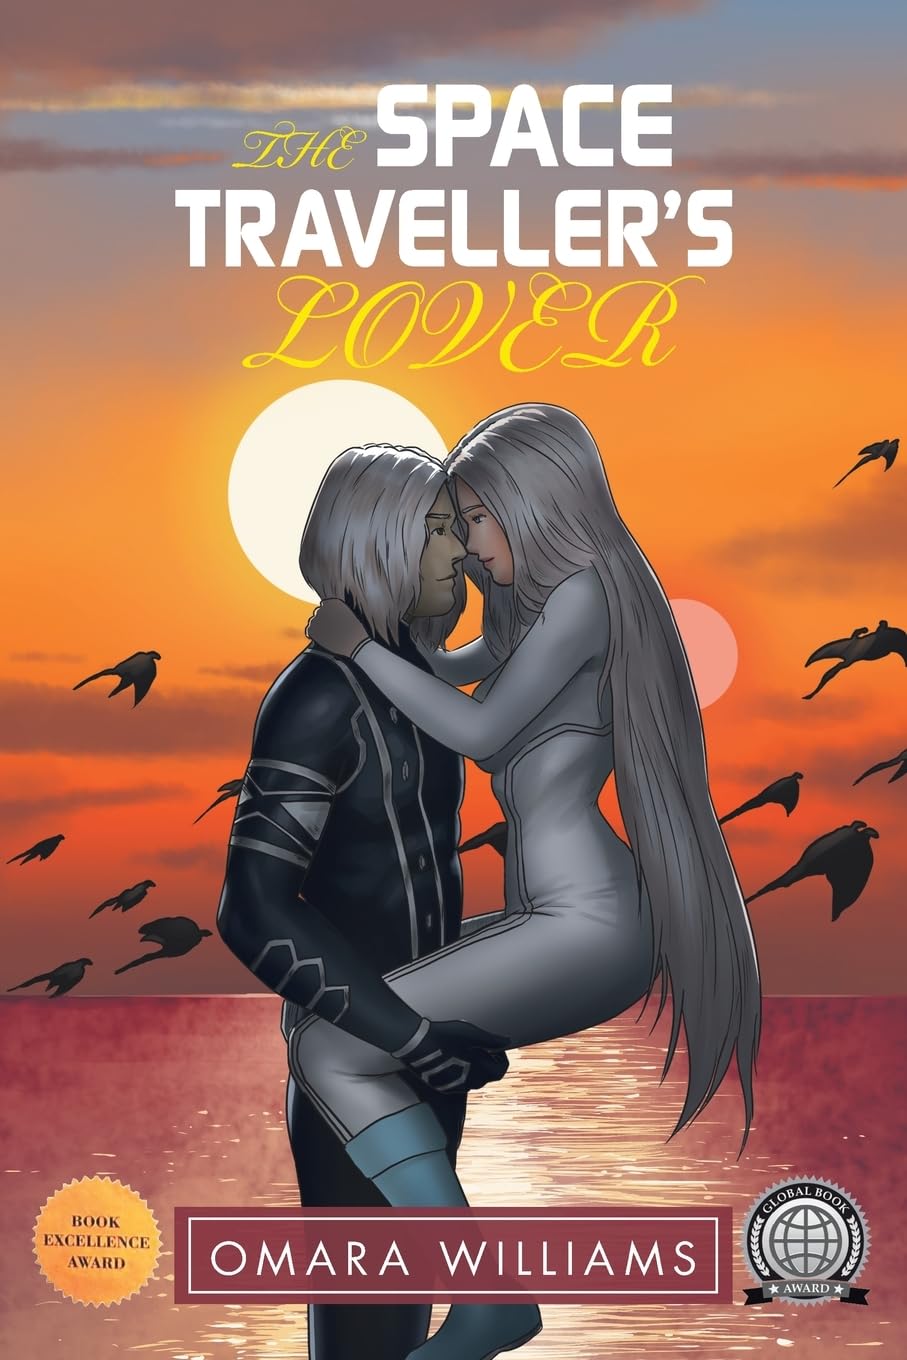 "The Space Traveller’s Lover" by Omara Williams: A Captivating Blend of Mystery, Love, and Otherworldly Encounters